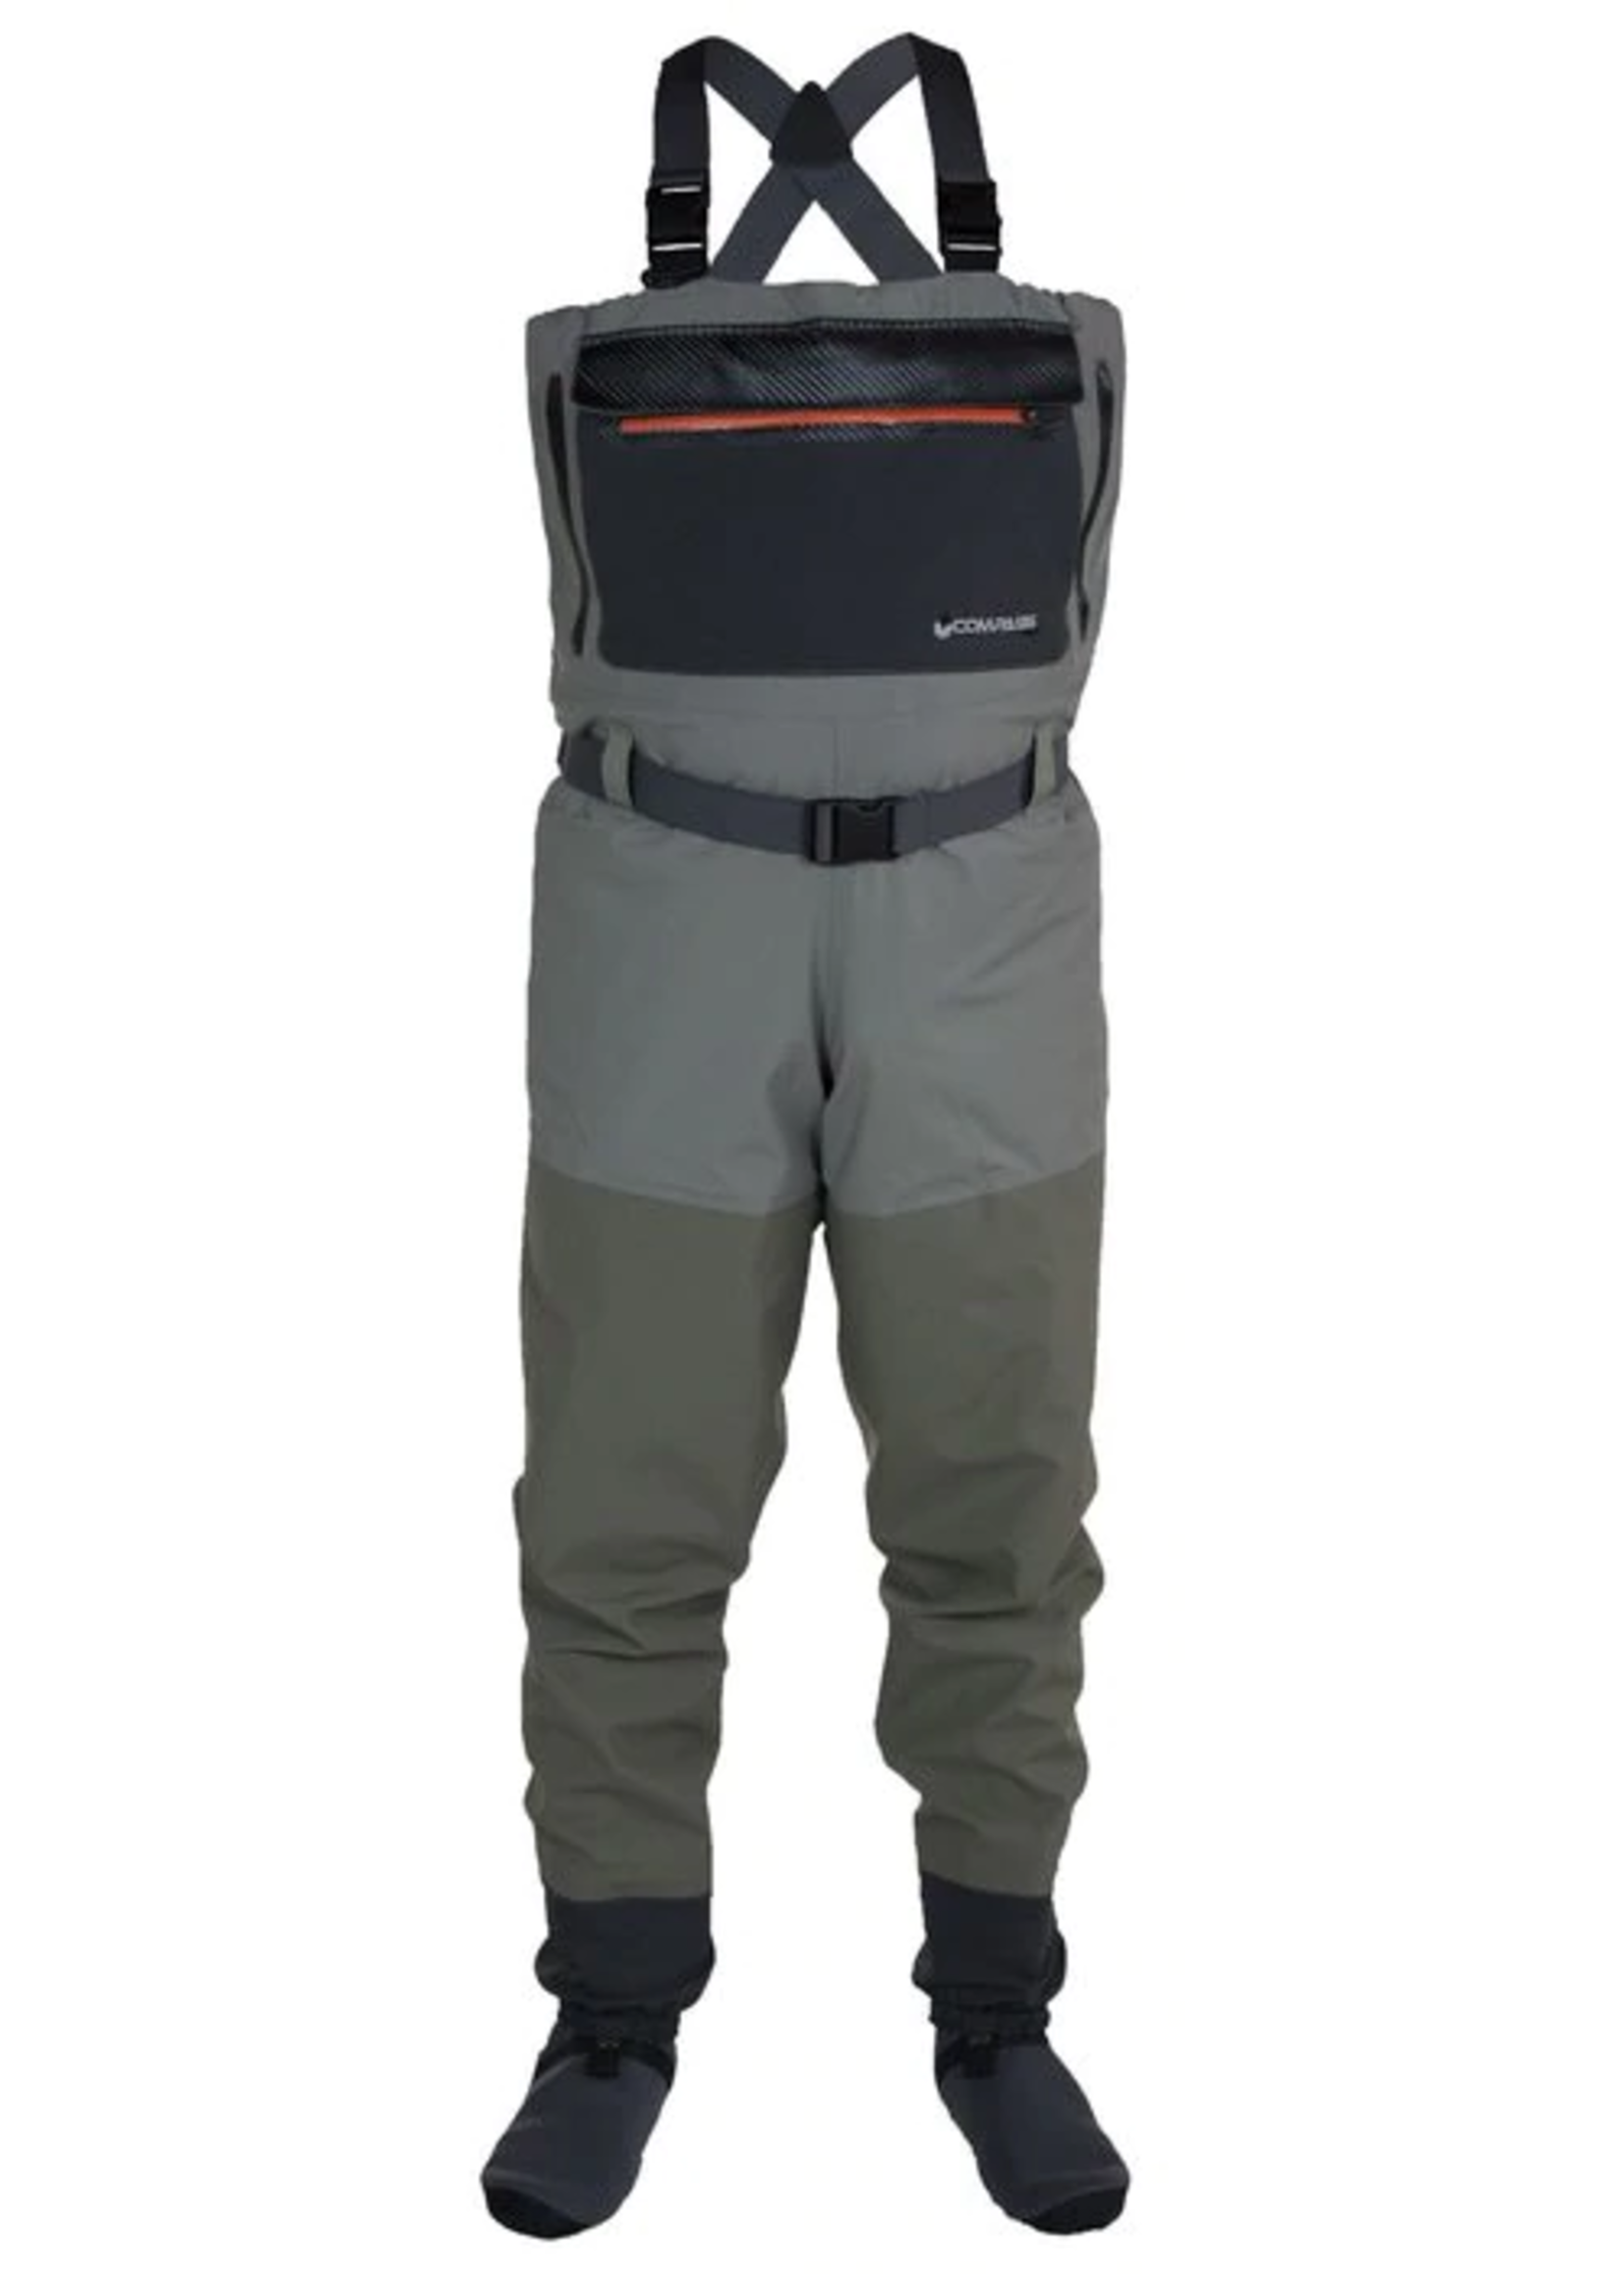 Quick-Drain Breathable Wader with 4mm Stocking Foot for Plateau